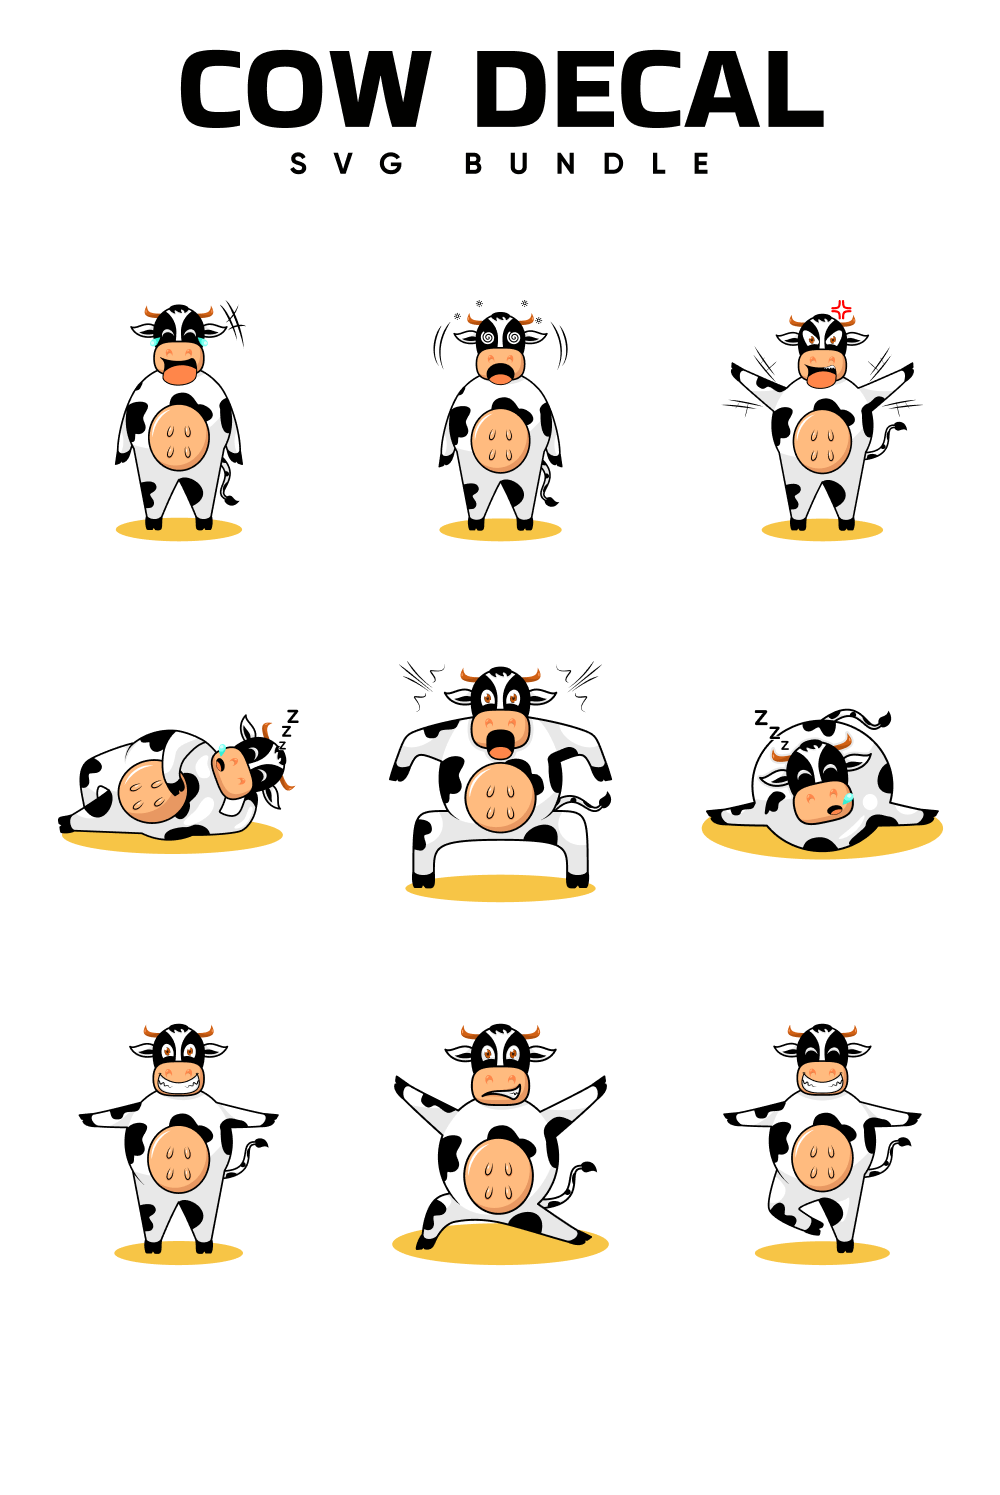 Cartoon cow with different poses and expressions.